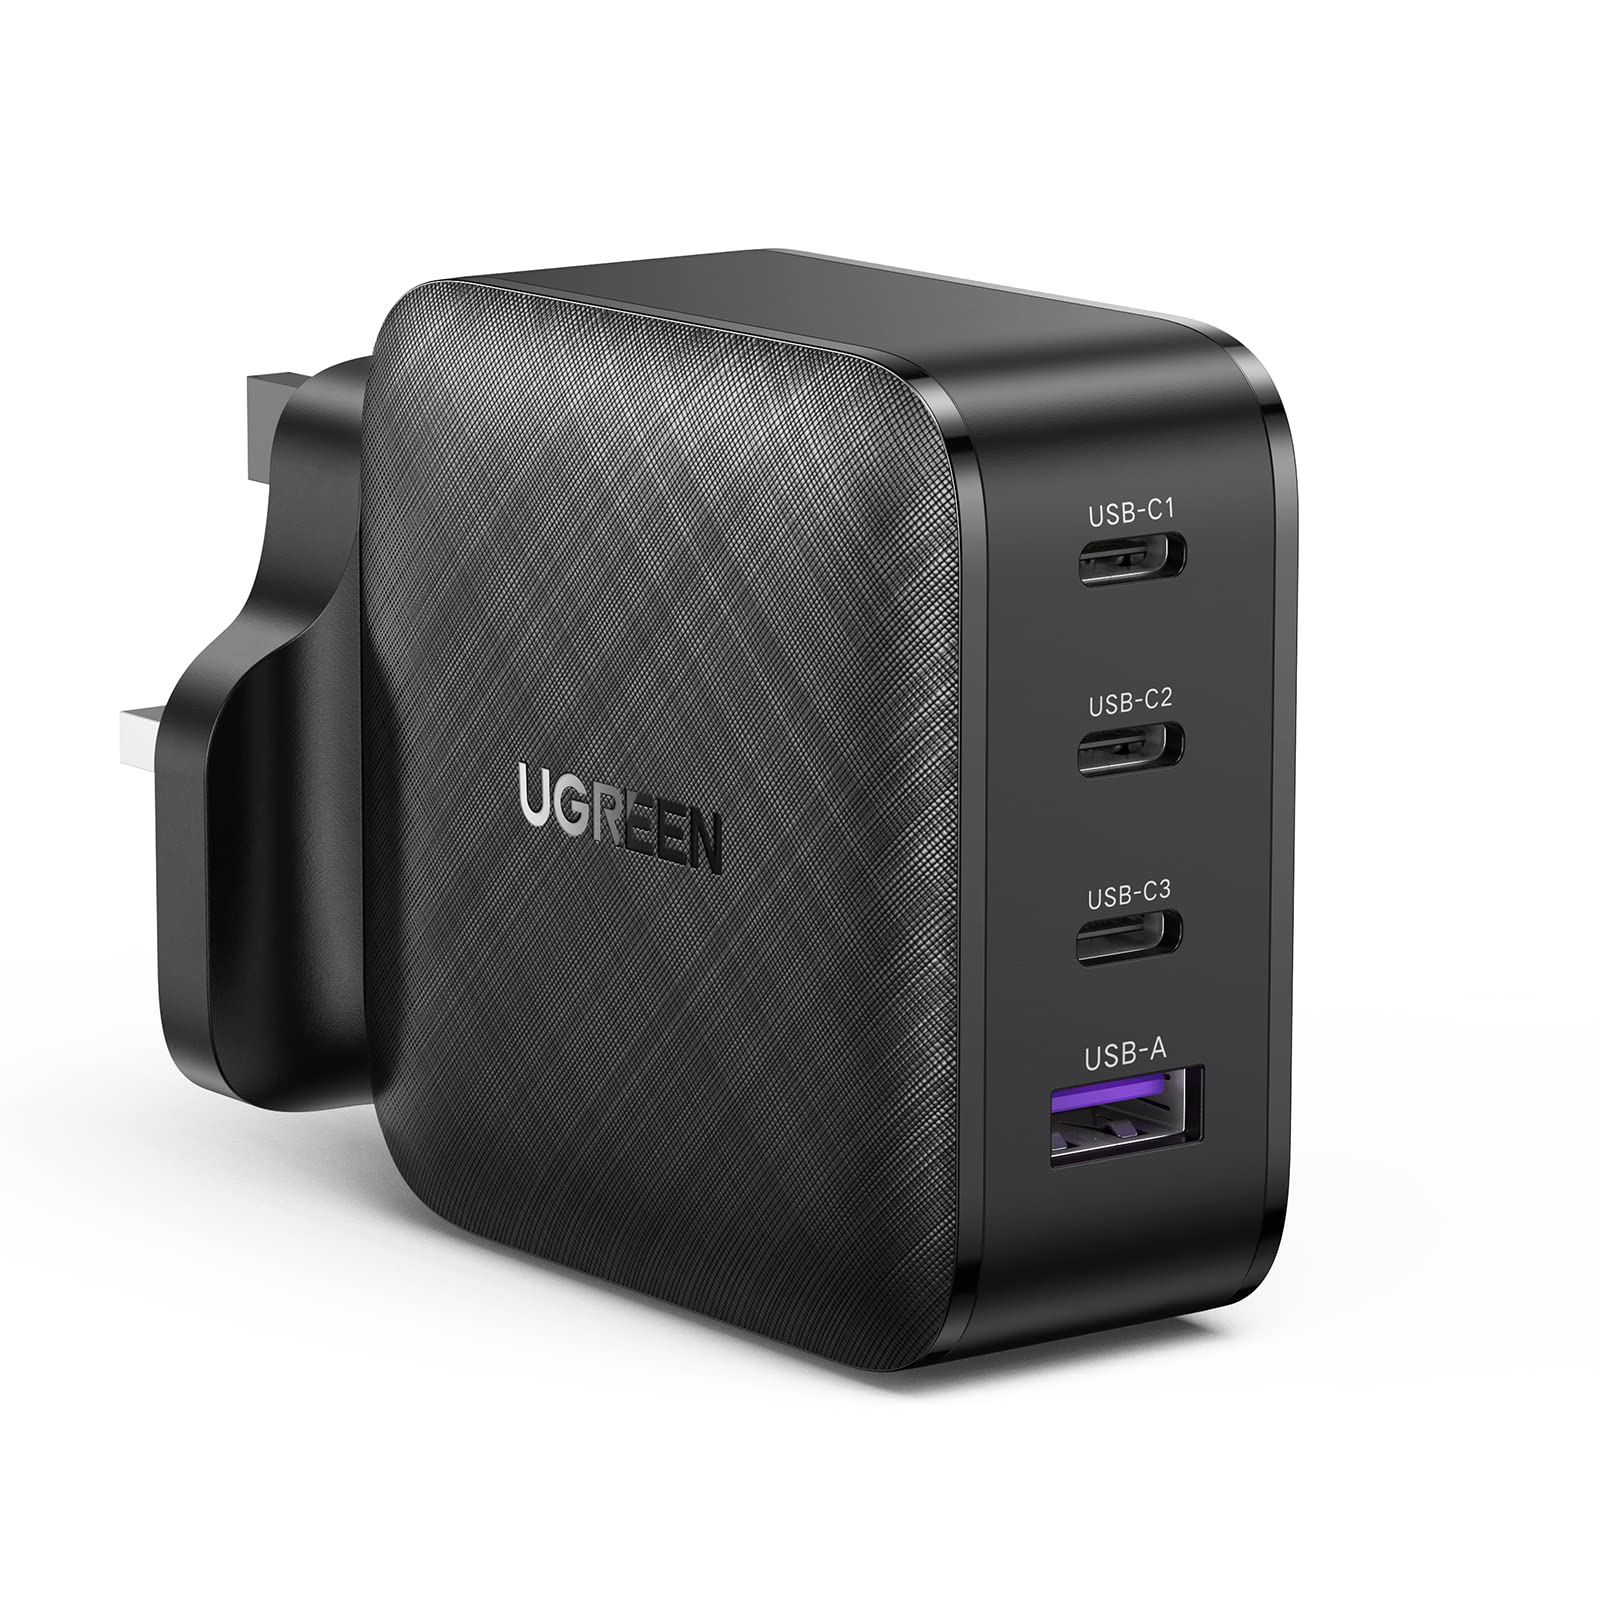 UGREEN 4 Ports USB C GaN Charger Plug Type C PD 65W QC 3.0 Fast Wall Mains Power Delivery Adapter for Laptops, MacBook Pro/Air, Steam Deck, iPad, iPhone,Samsung, Huawei, Oneplus, Xiaomi, Dell, Lenovo